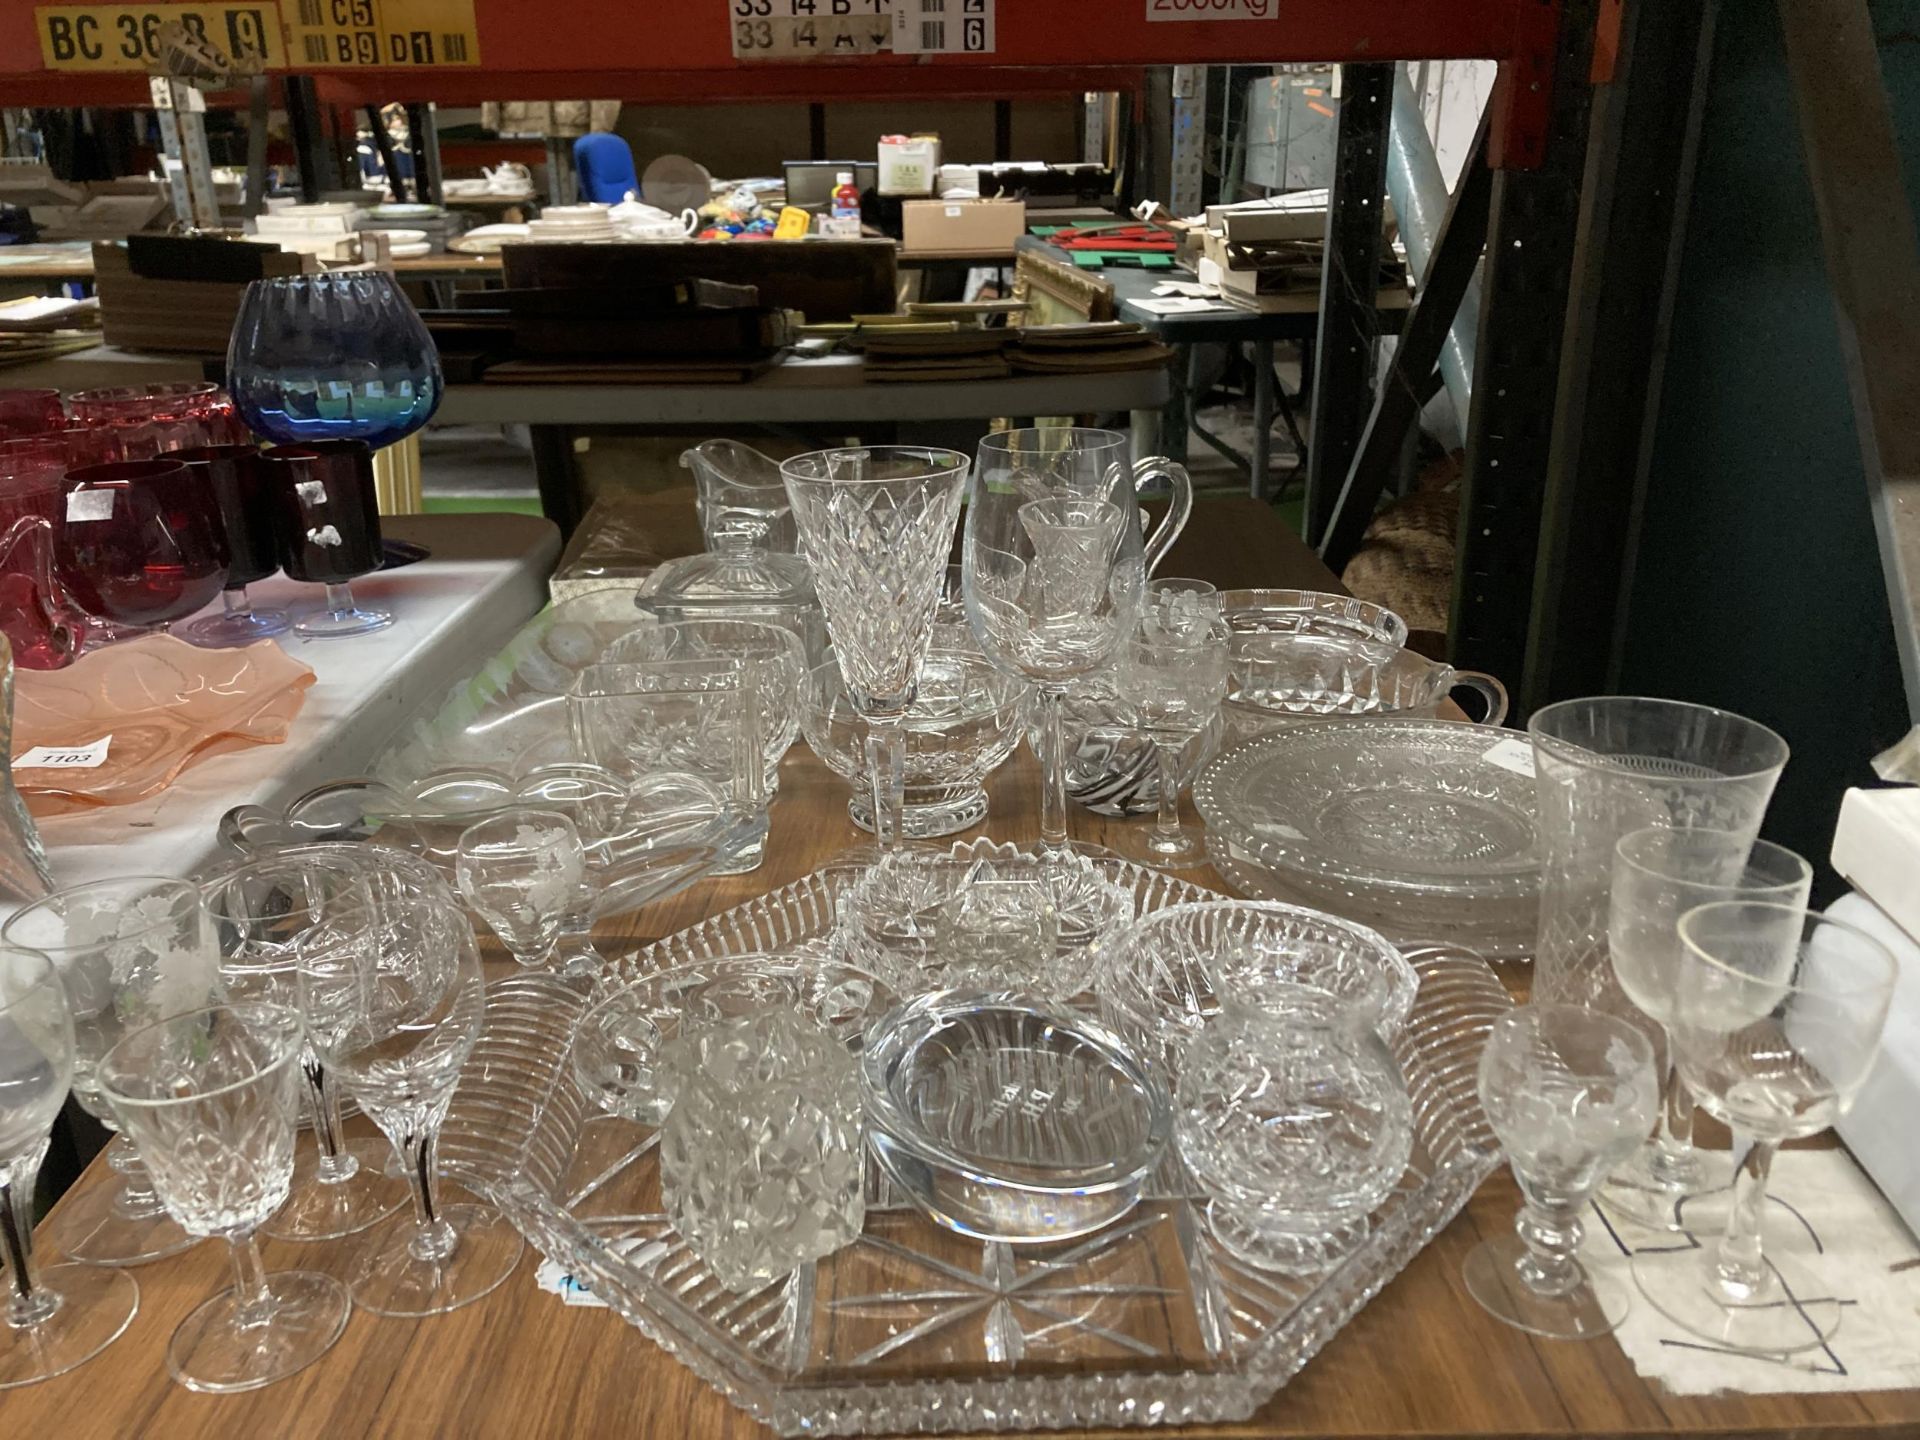 A LARGE QUANTITY OF GLASSWARE TO INCLUDE GLASSES, BOWLS, TRAYS, CANDLEHOLDERS, ETC., - Image 2 of 4